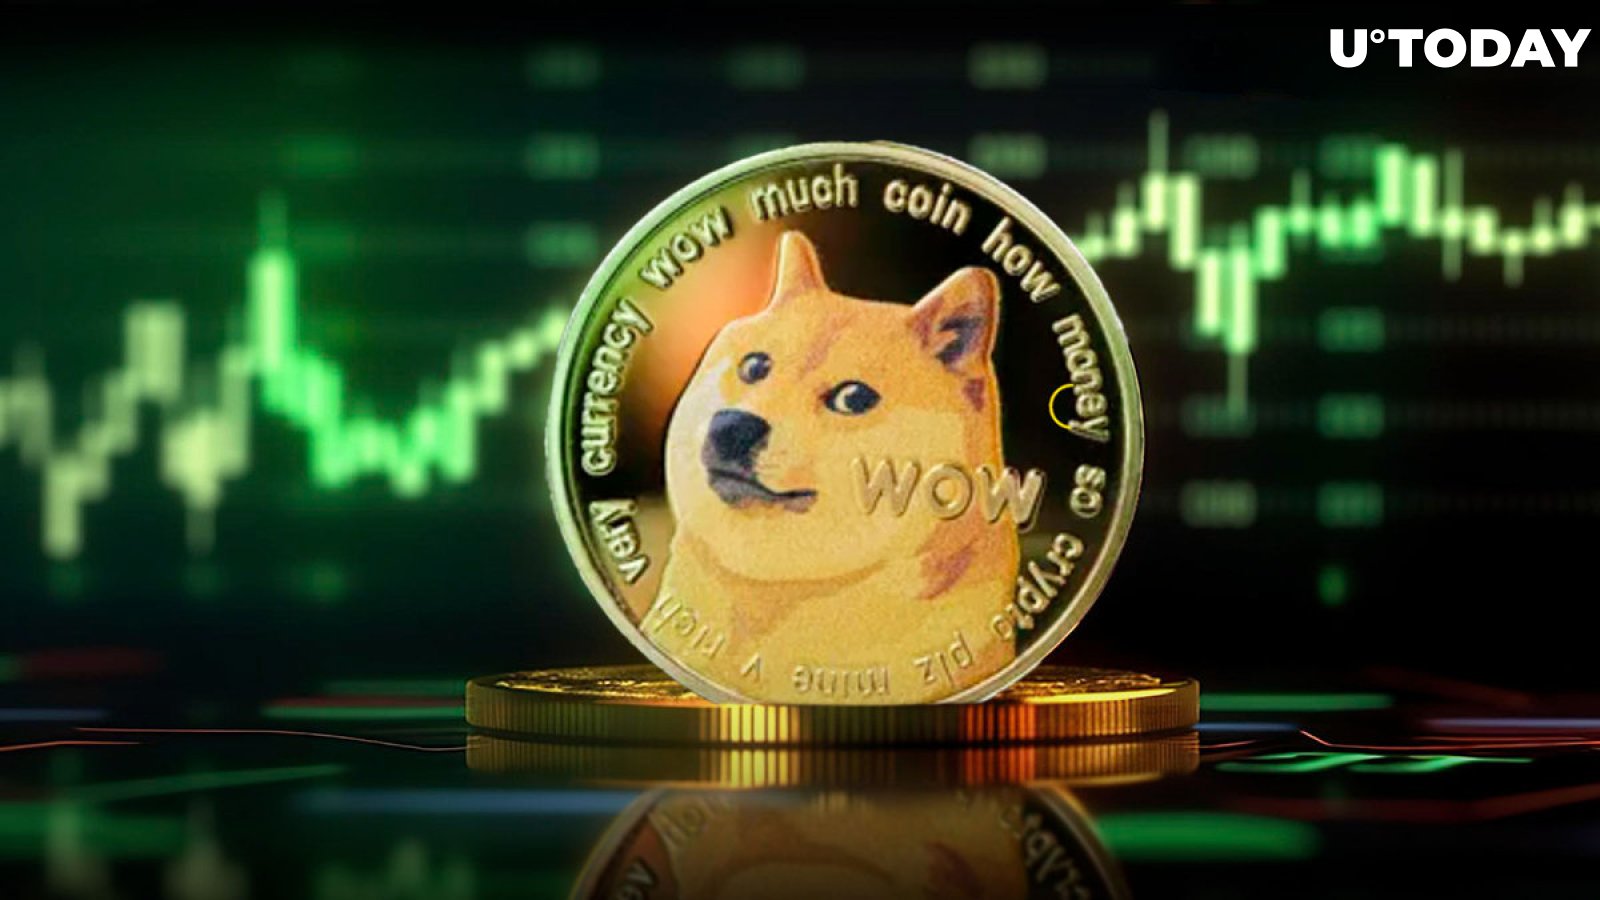 800 Million DOGE in 1 Hour — What's Happening?